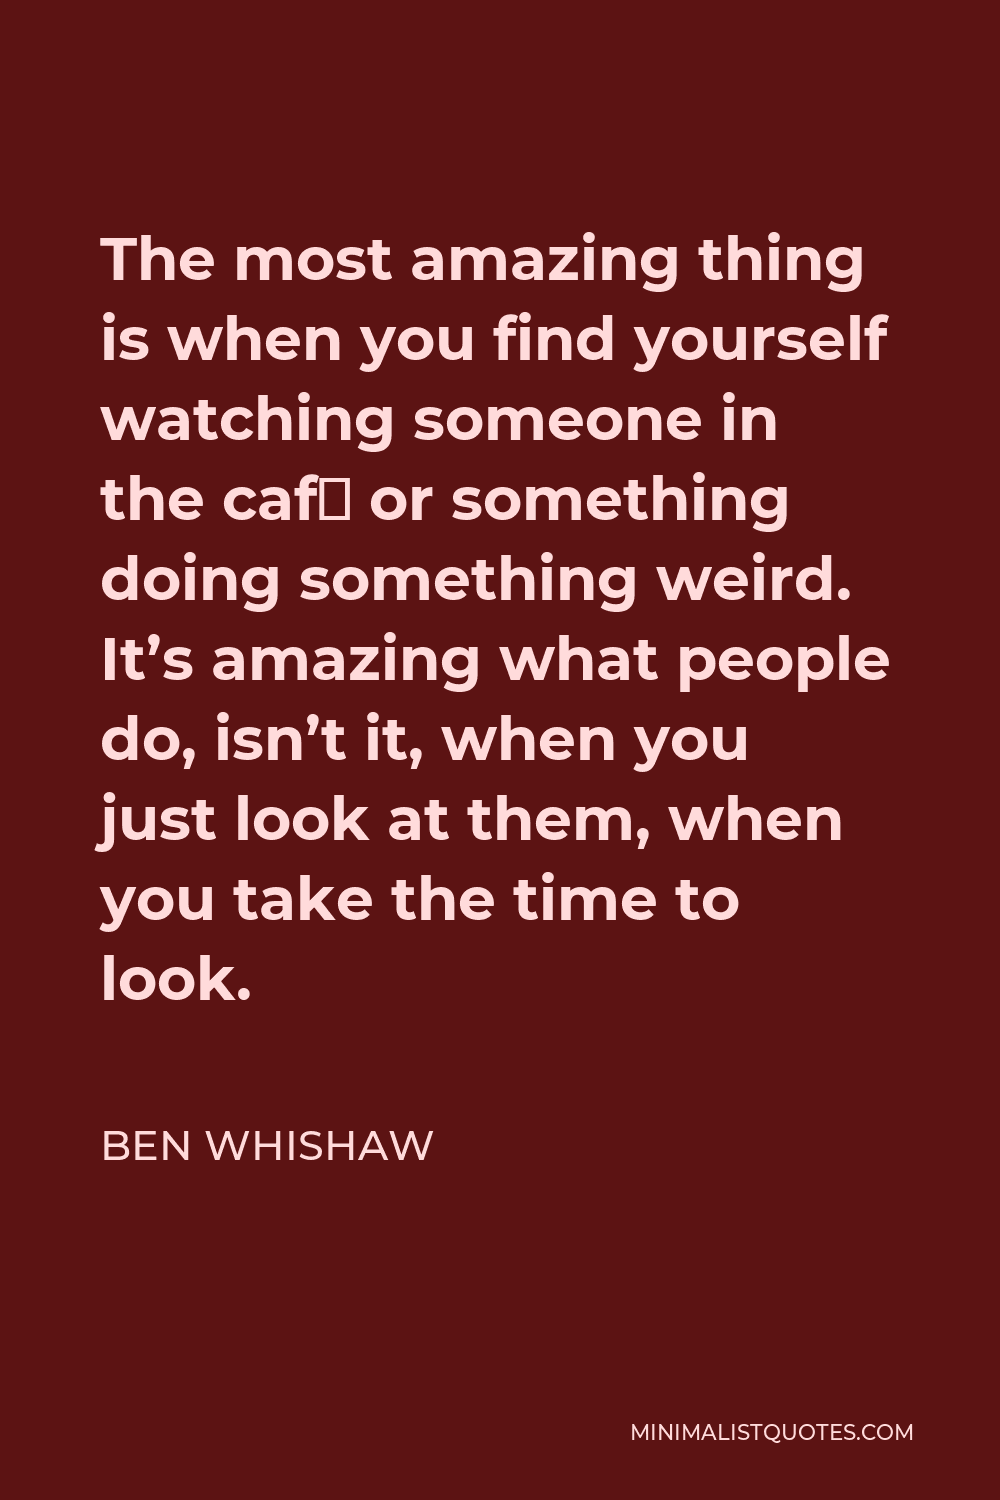 Ben Whishaw Quote - The most amazing thing is when you find yourself watching someone in the café or something doing something weird. It’s amazing what people do, isn’t it, when you just look at them, when you take the time to look.